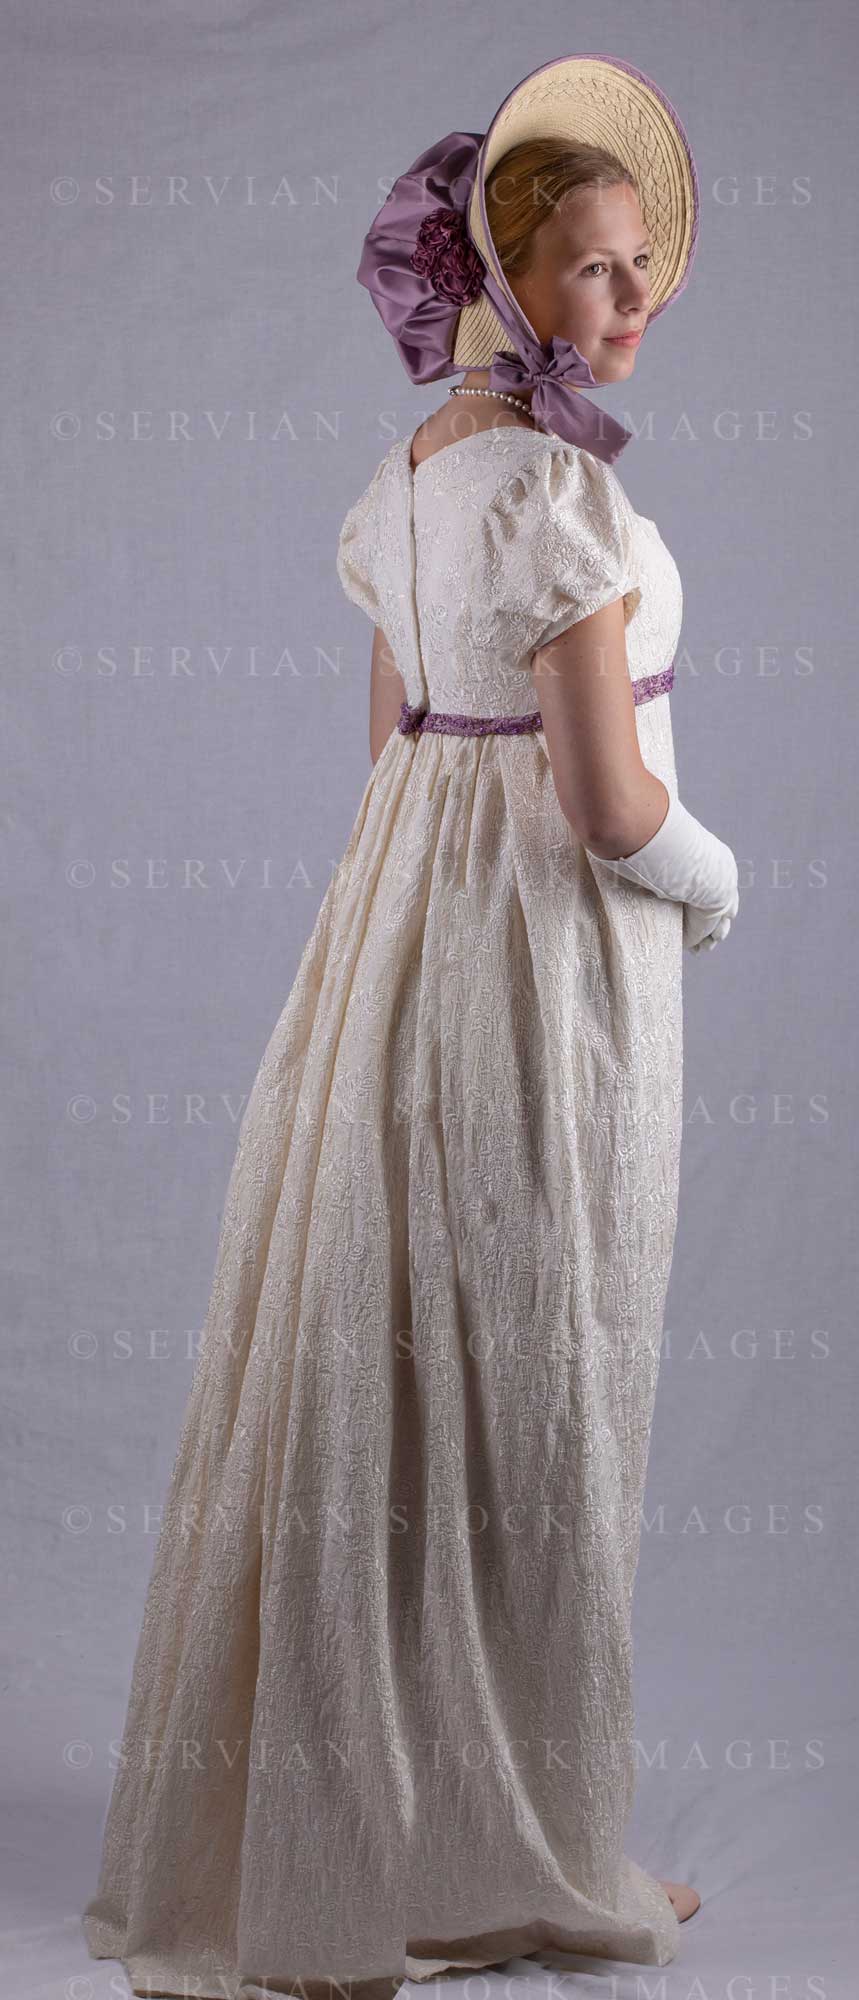 Regency woman in a cream embroidered dress and long gloves (Skye 0047)